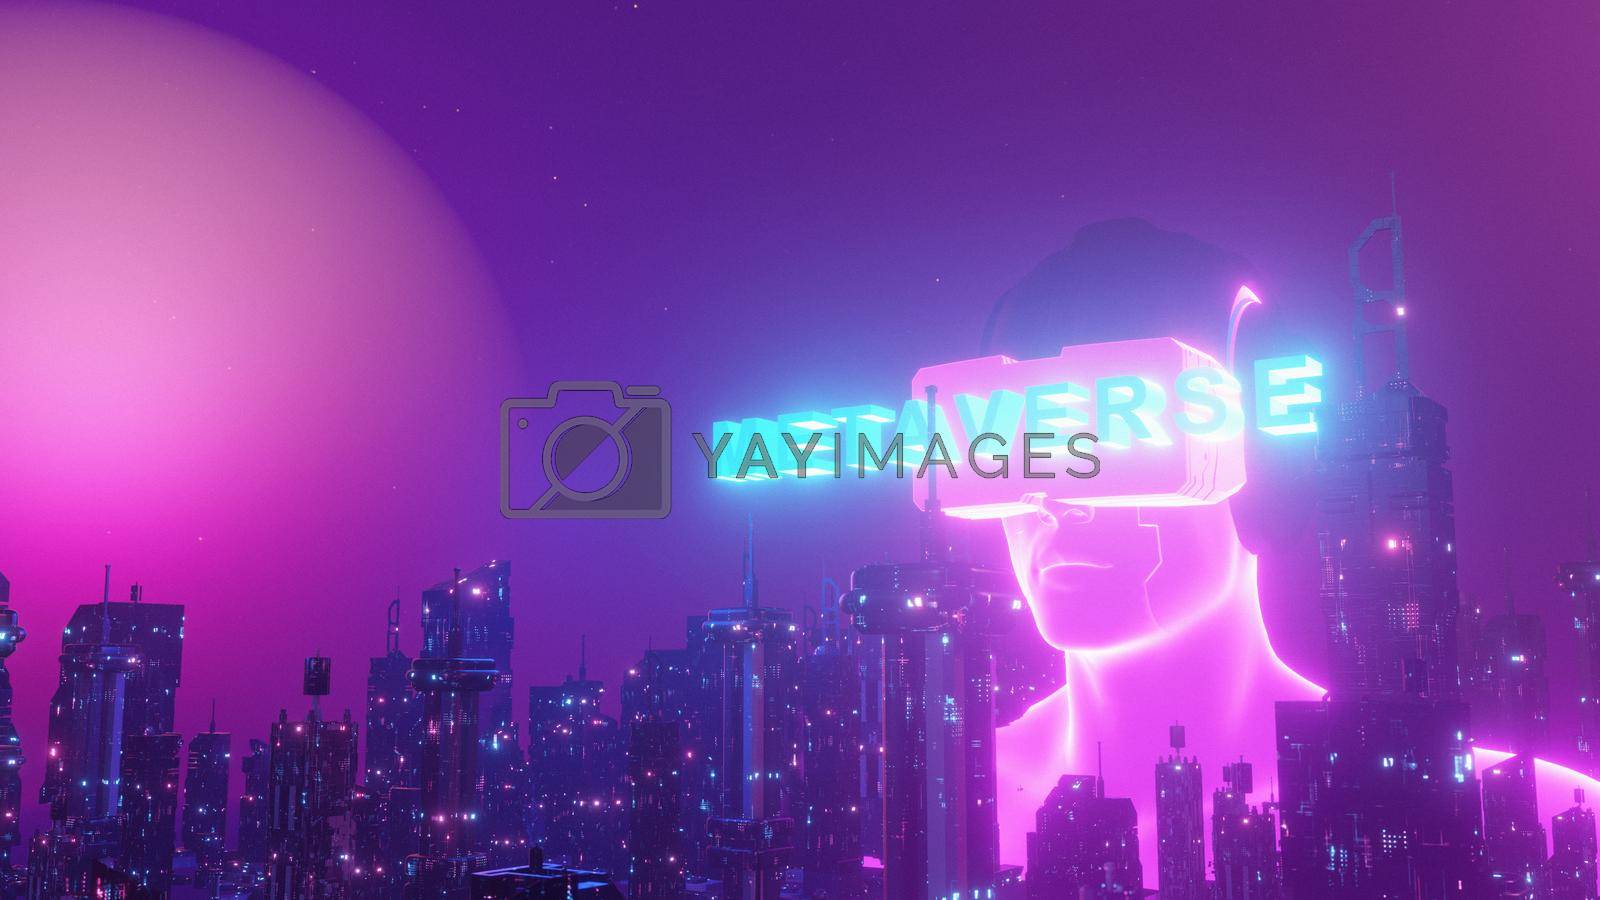 Metaverse VR Virtual Reality Cyber City World Virtual Reality Technology Concept Future Banner Background 3d Illustration